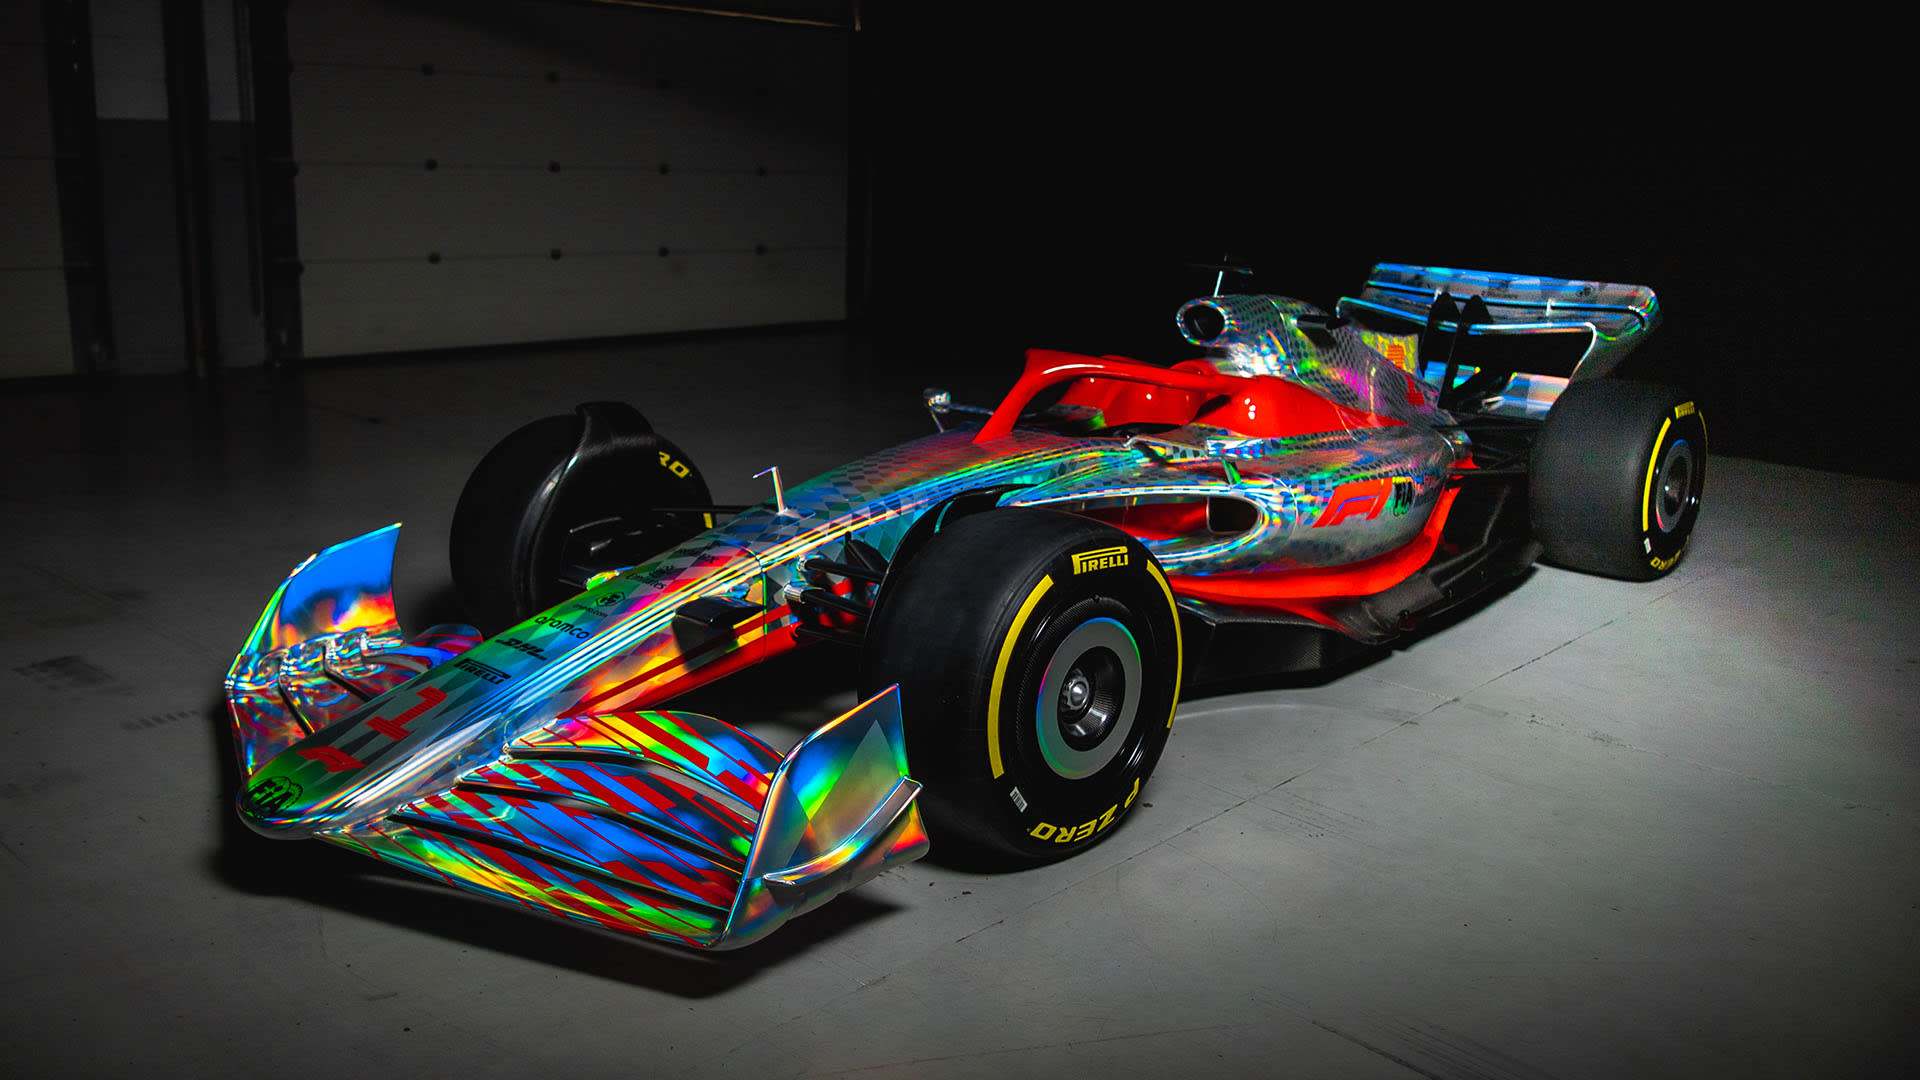 10 things you need to know about the all-new 2022 F1 car - SomJournal.com